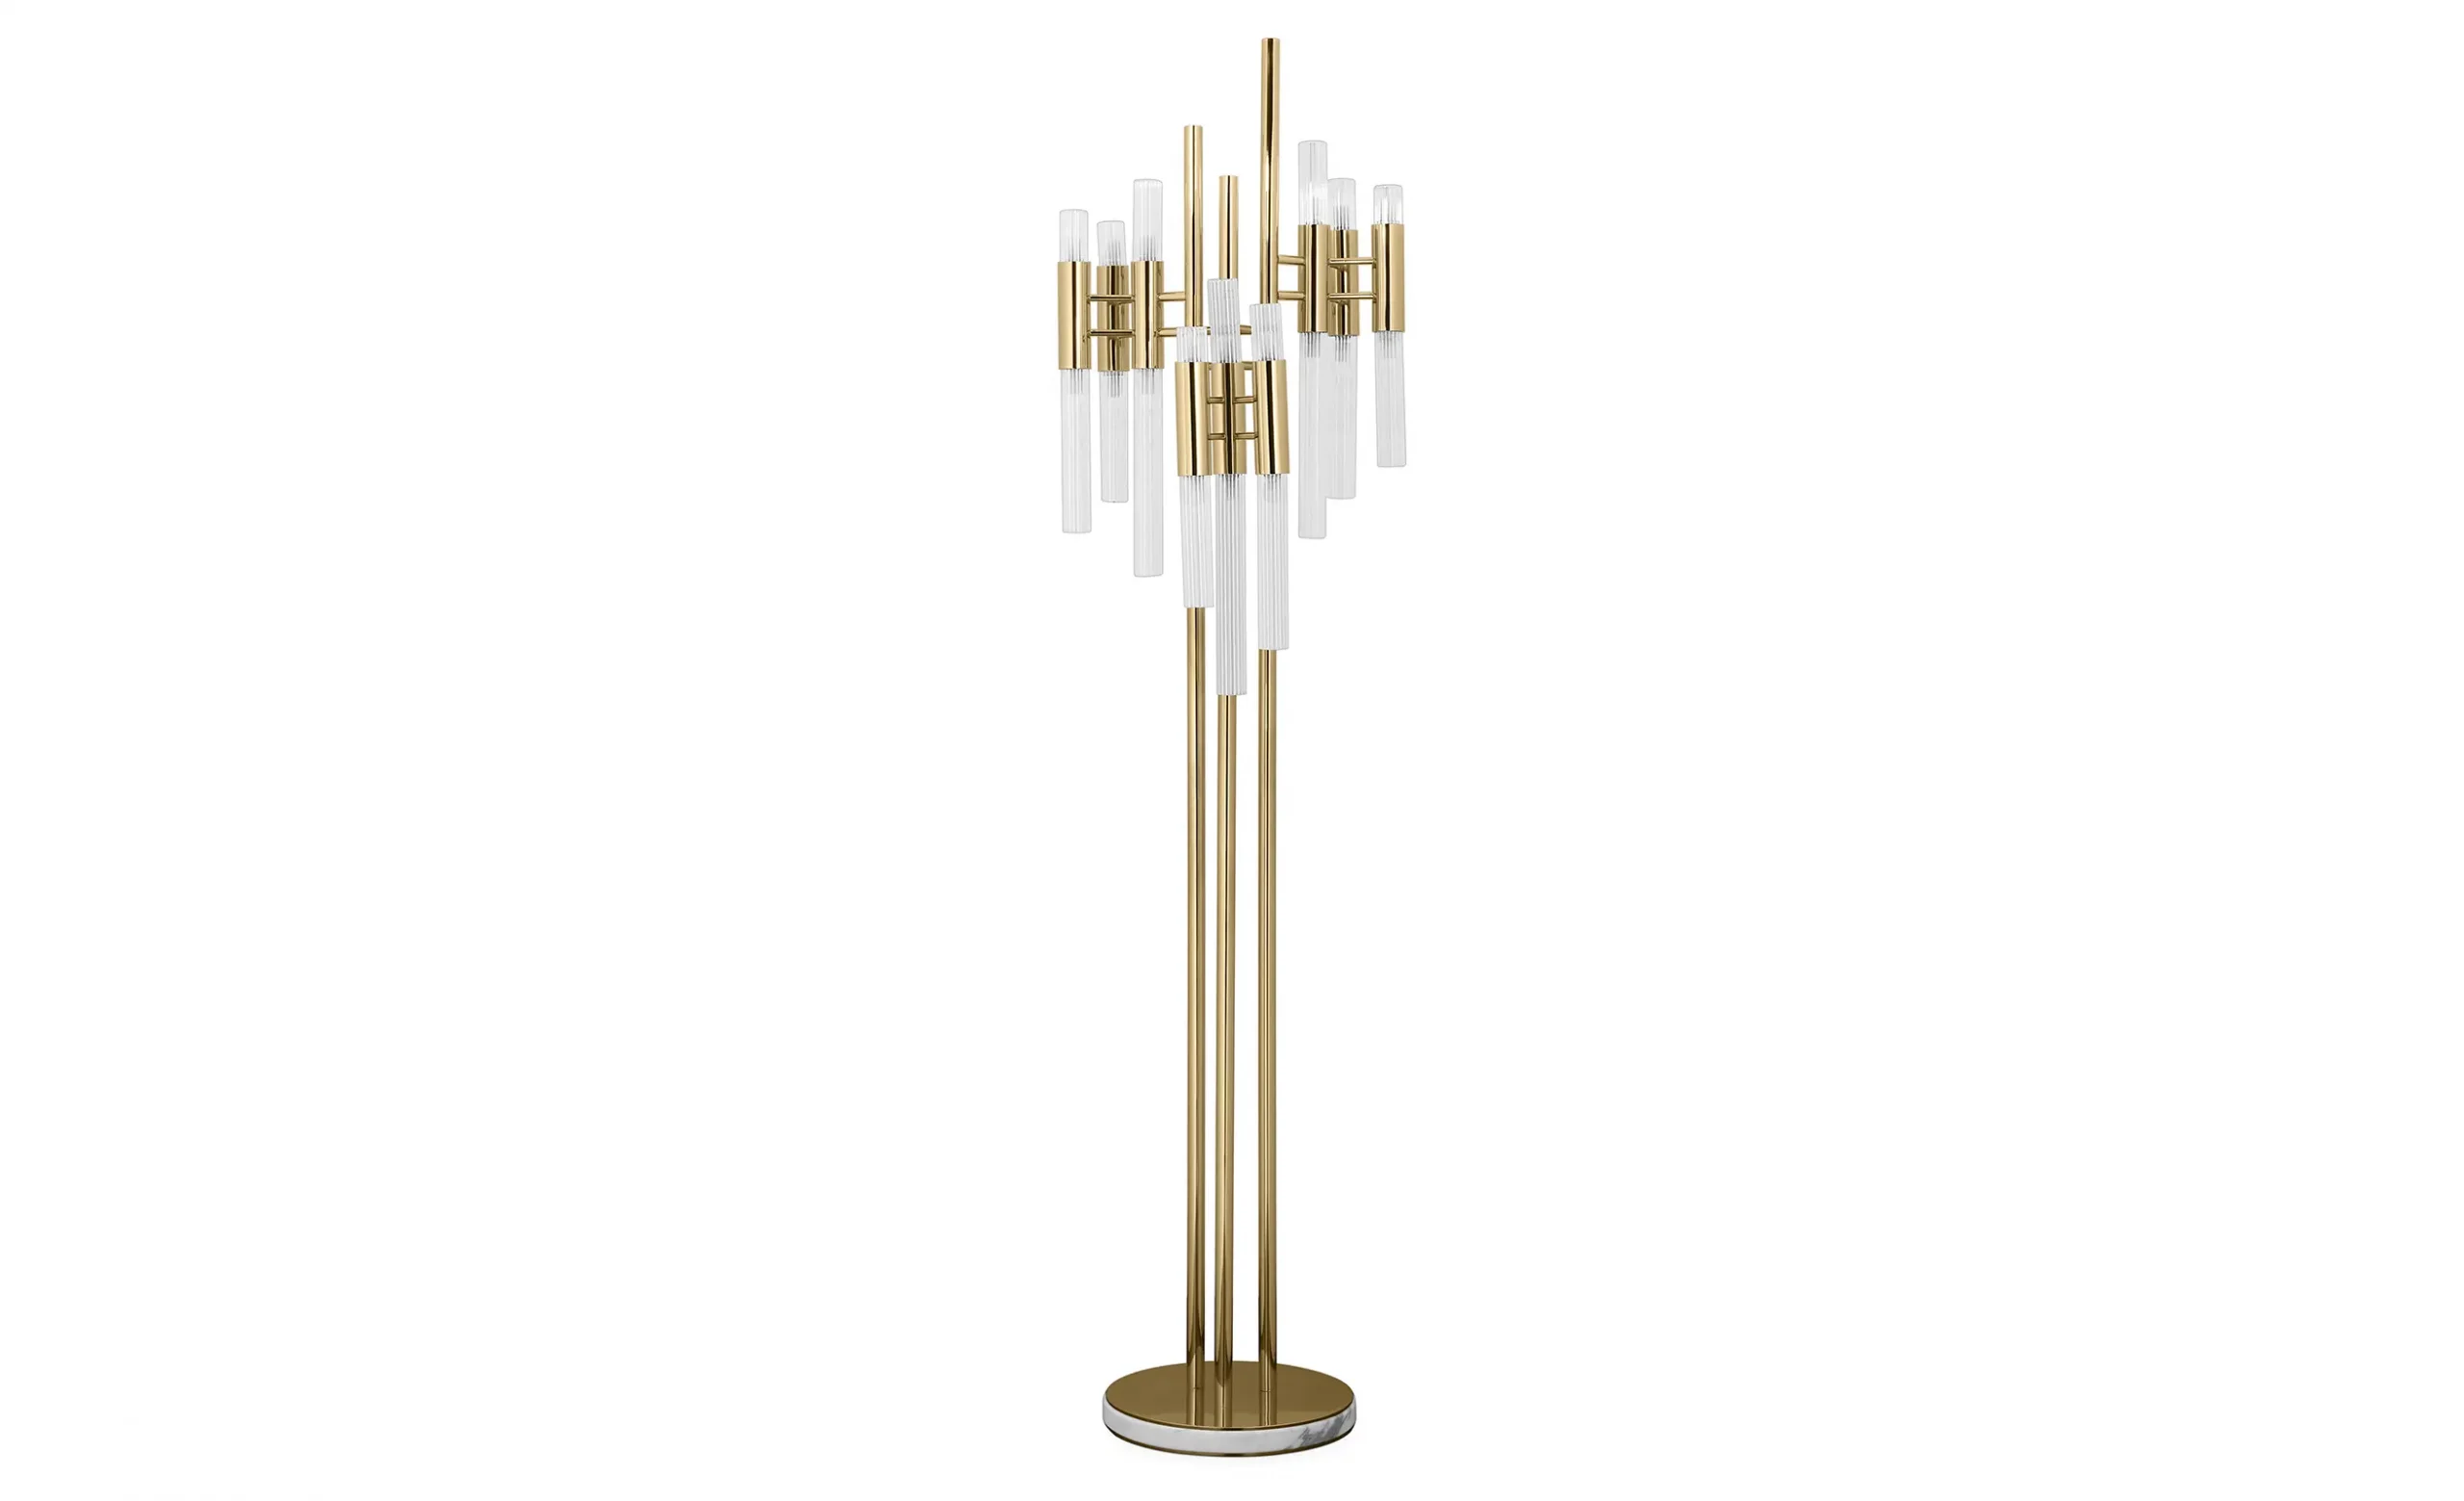 Synthesis of our top 5 floor lamps